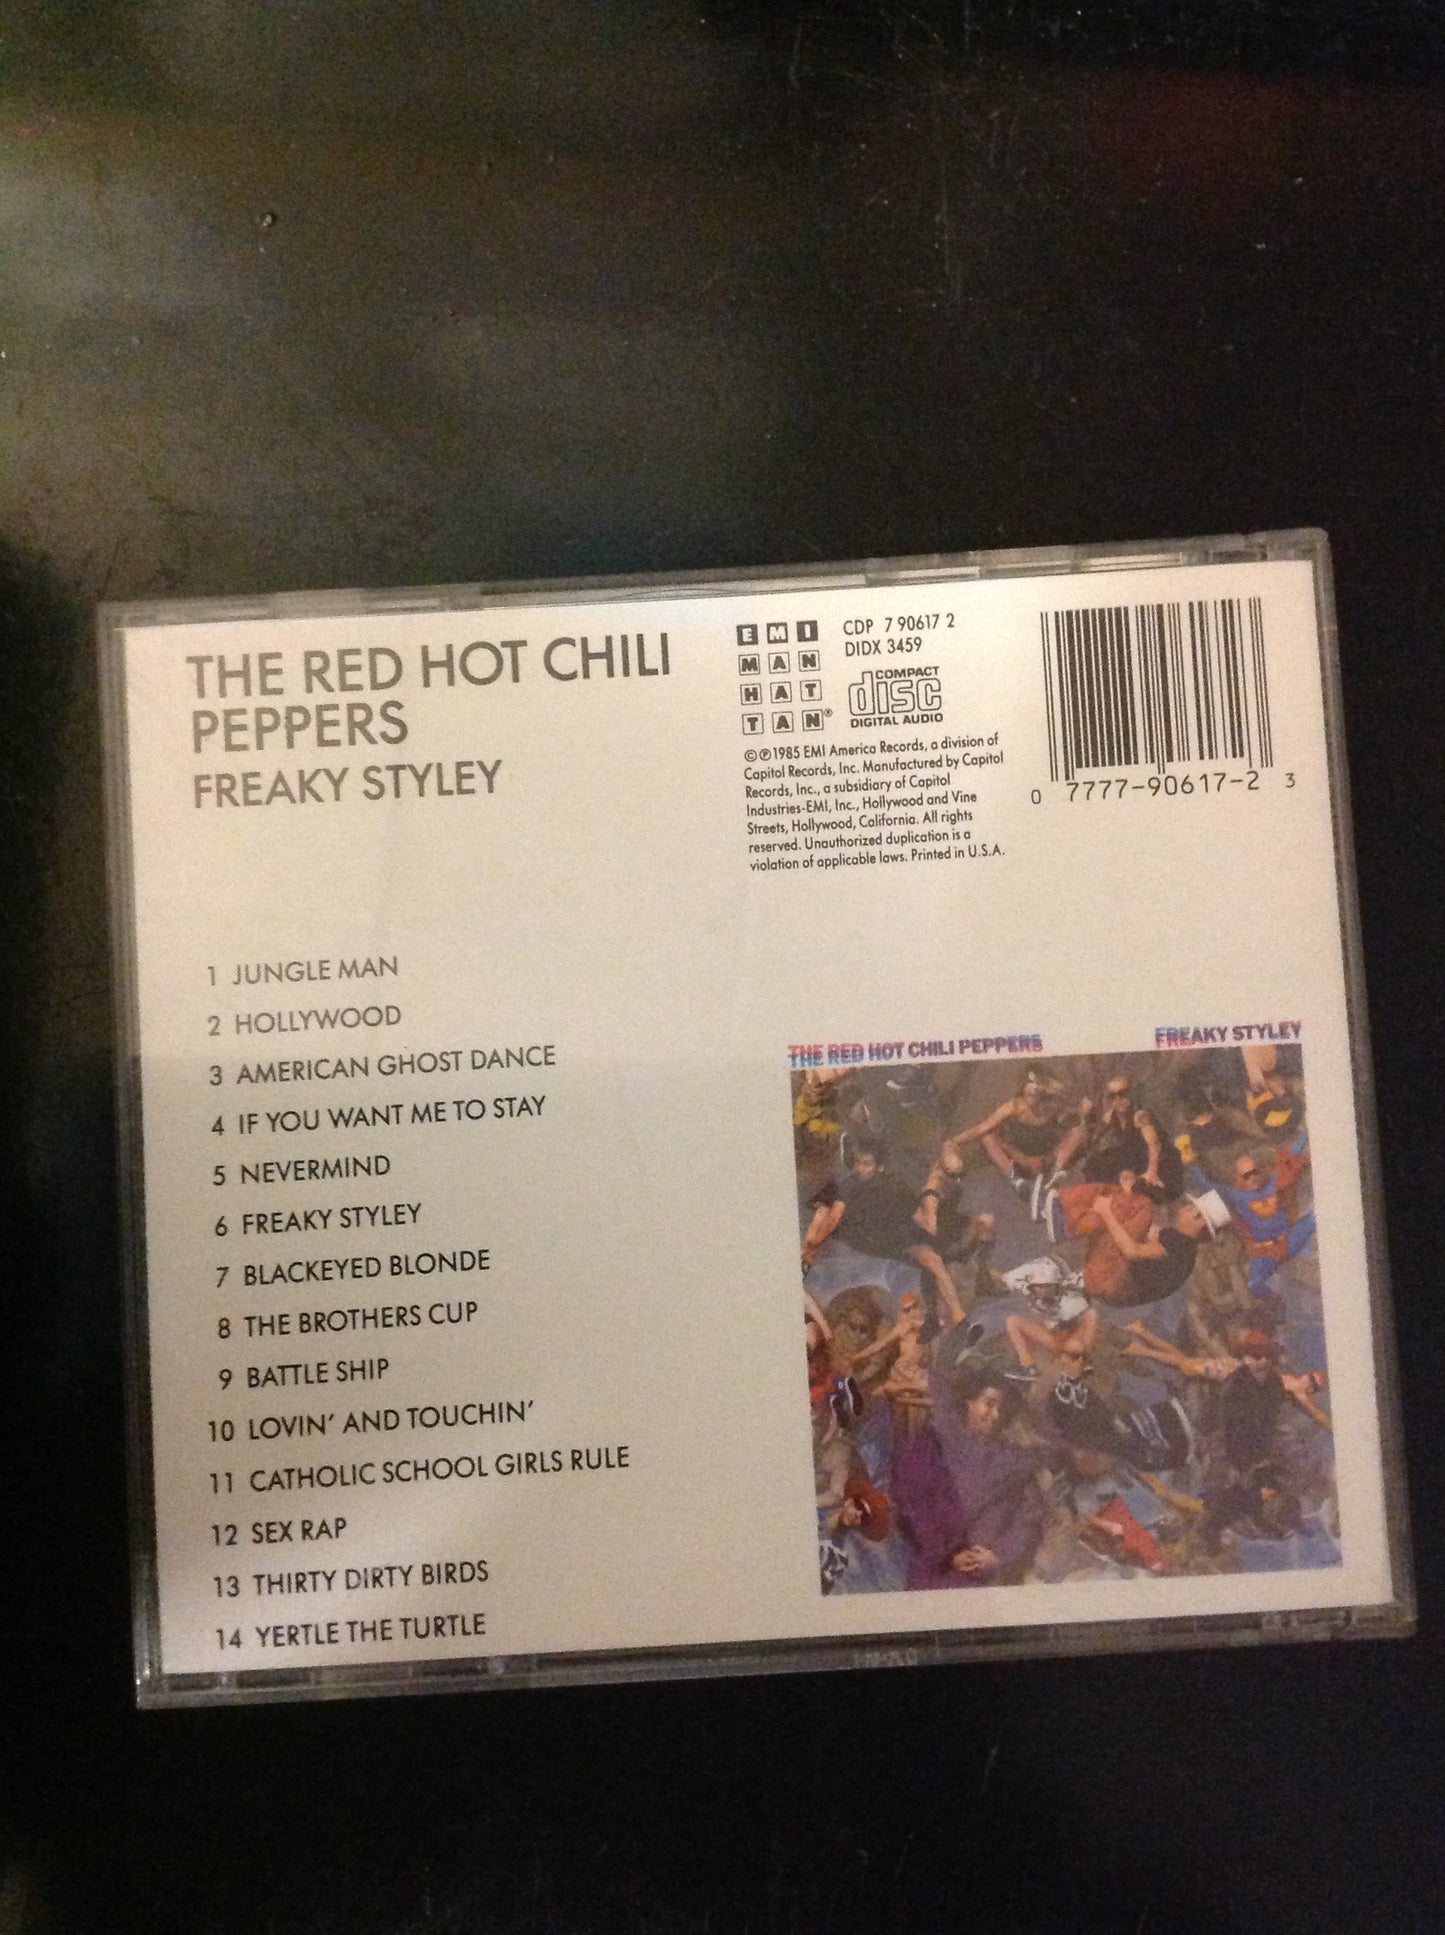 CD The Red Hot Chili Peppers Freaky Styley cdp7 906172 EMI Manhattan